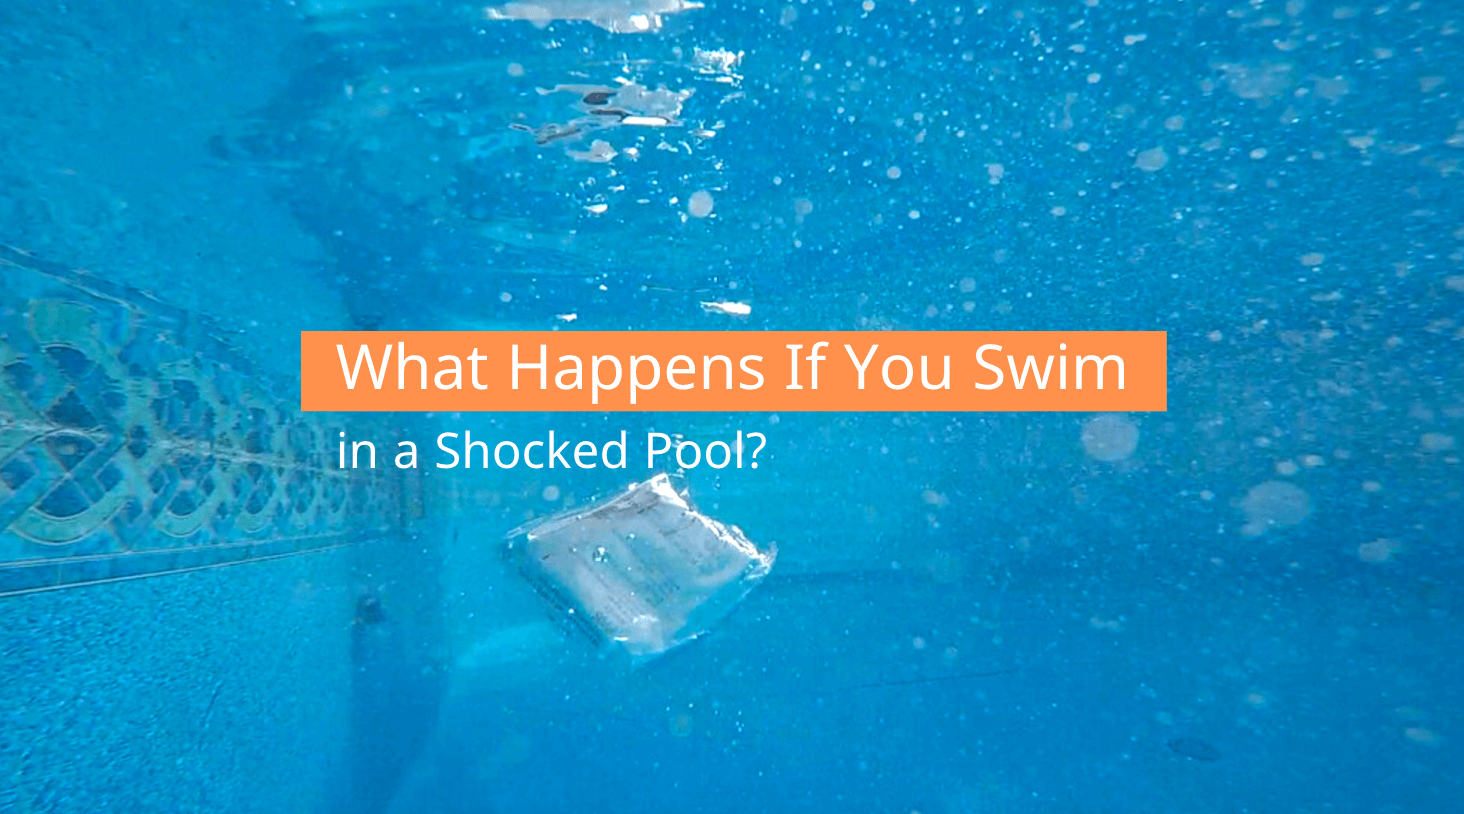 What Happens If You Swim in a Shocked Pool?